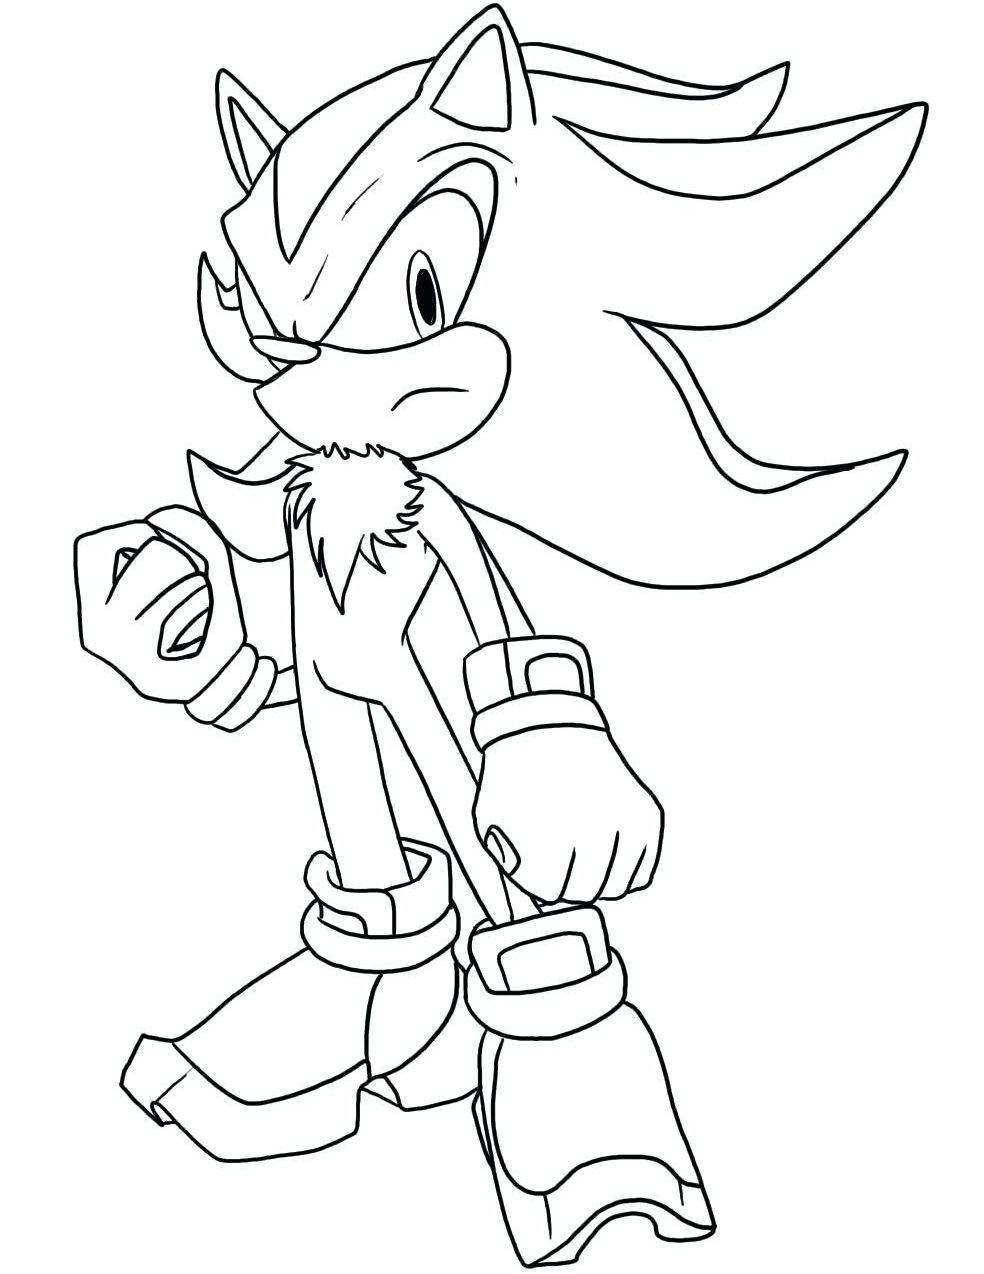 Shadow The Hedgehog Coloring Page